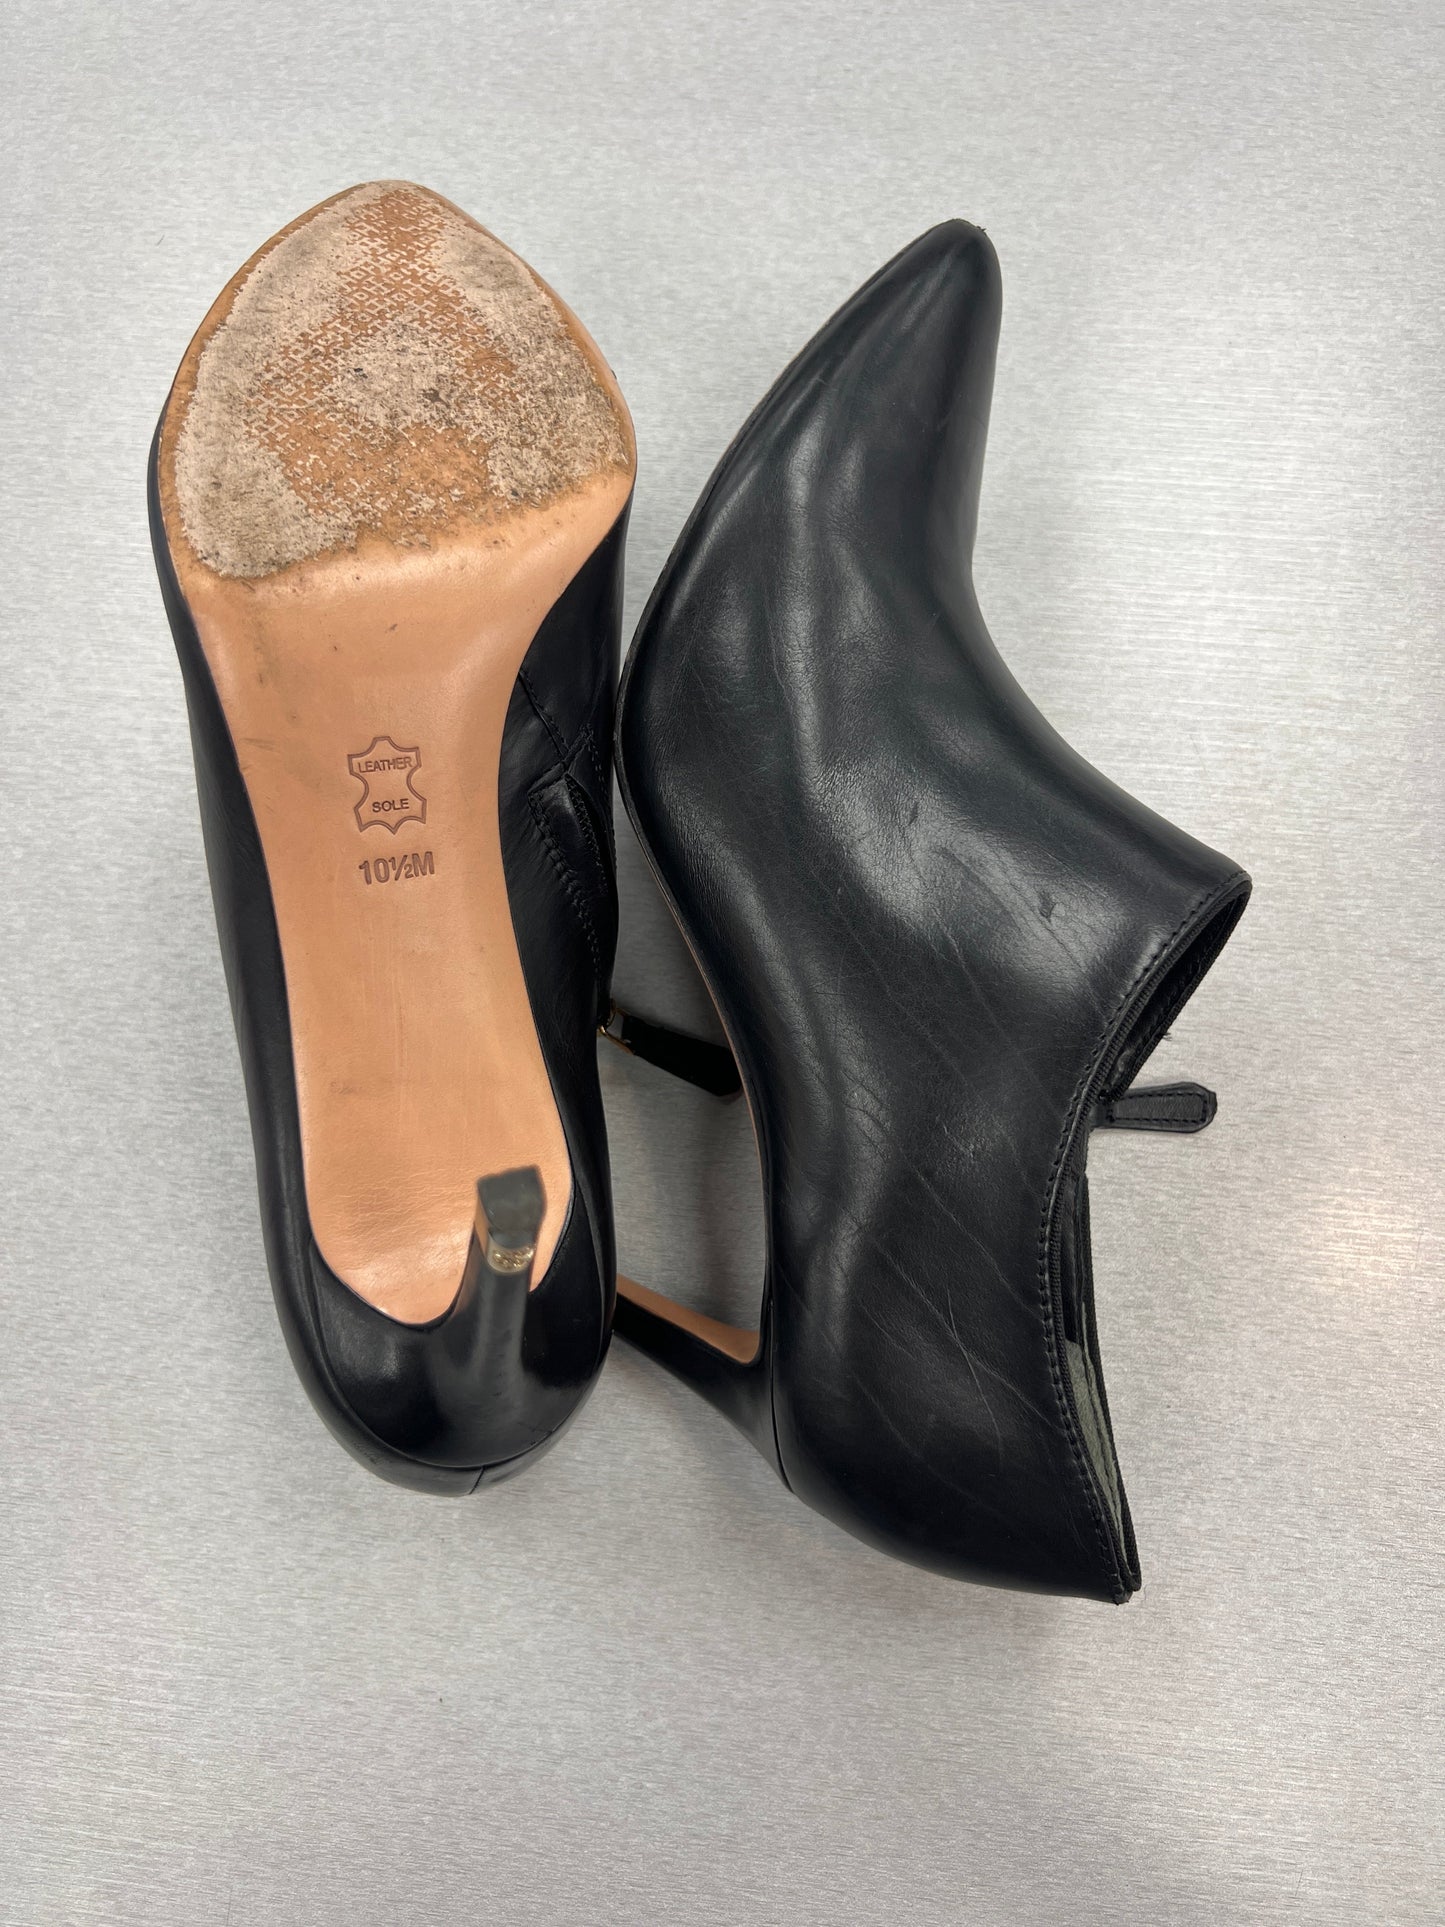 Shoes Heels Stiletto By Tory Burch Size: 10.5